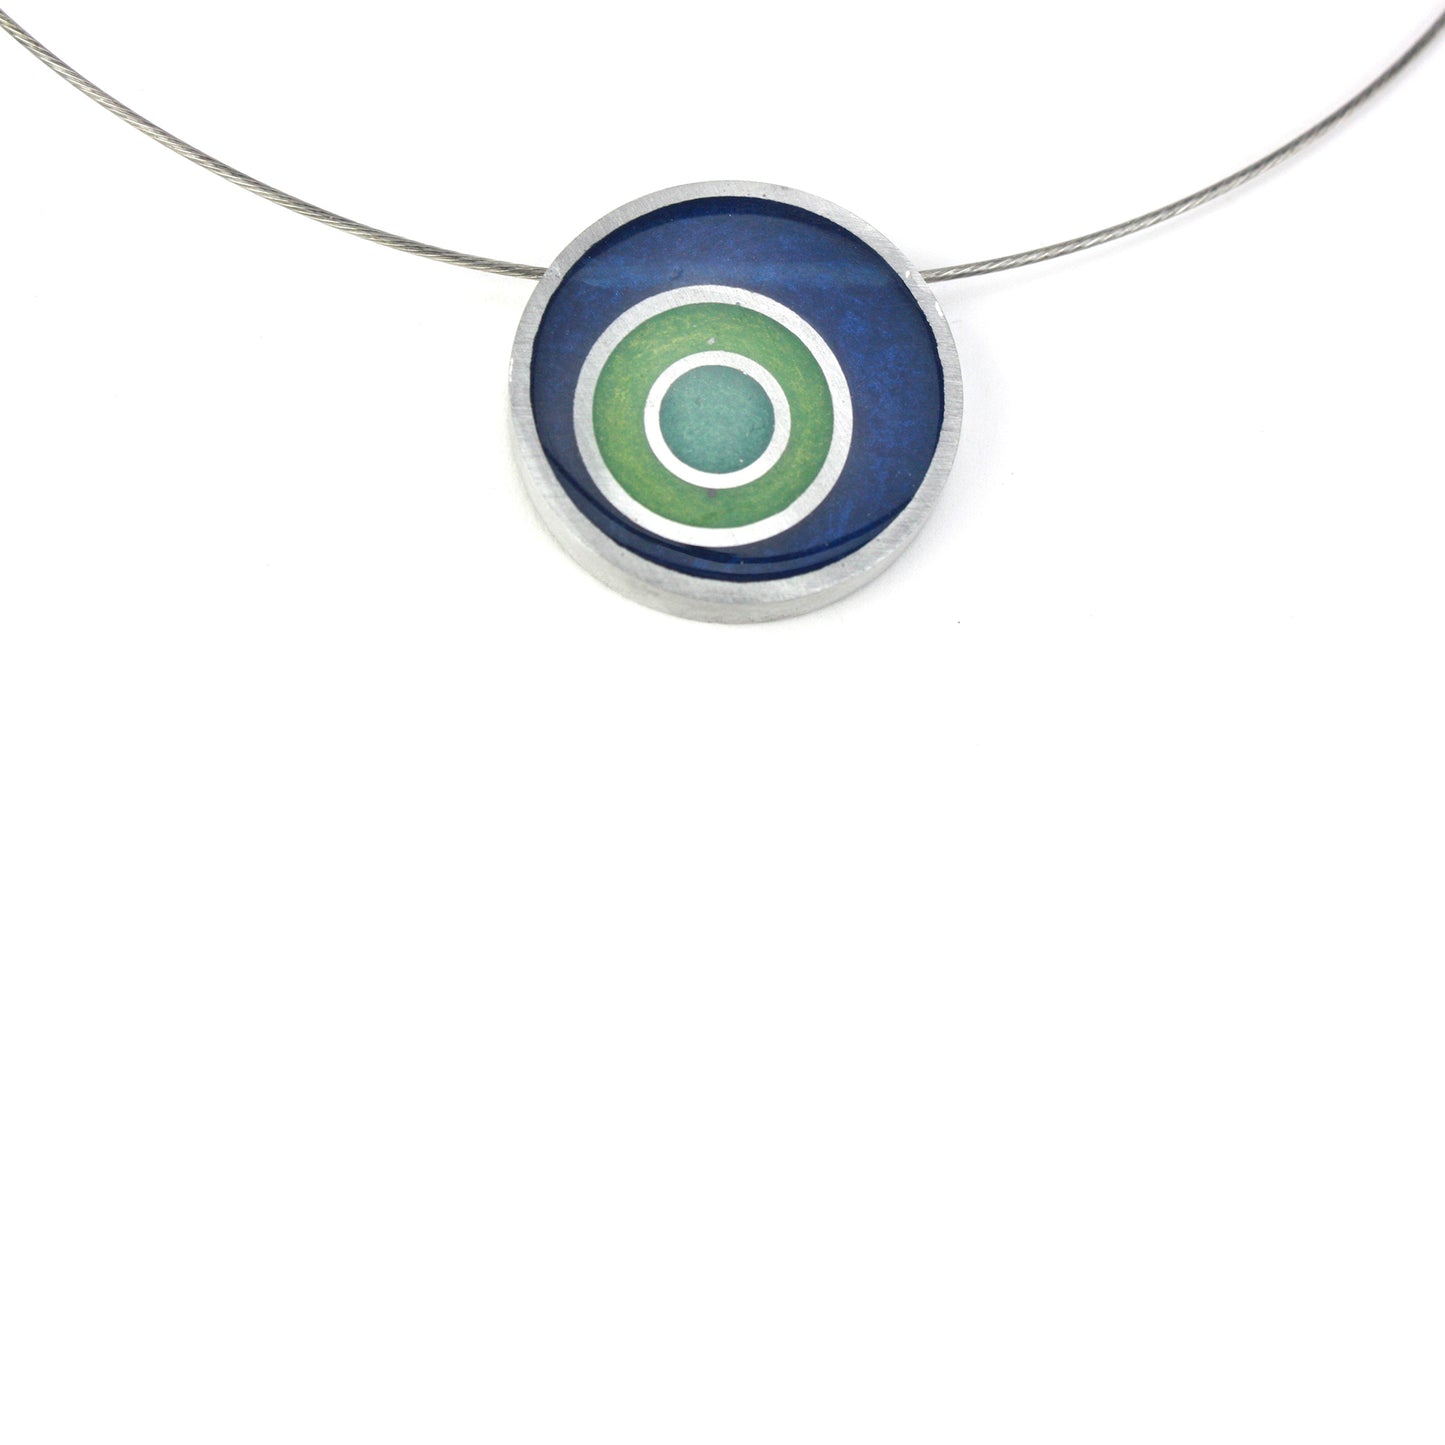 Resinique triple circle necklace - Dark blue, Green and turquoise